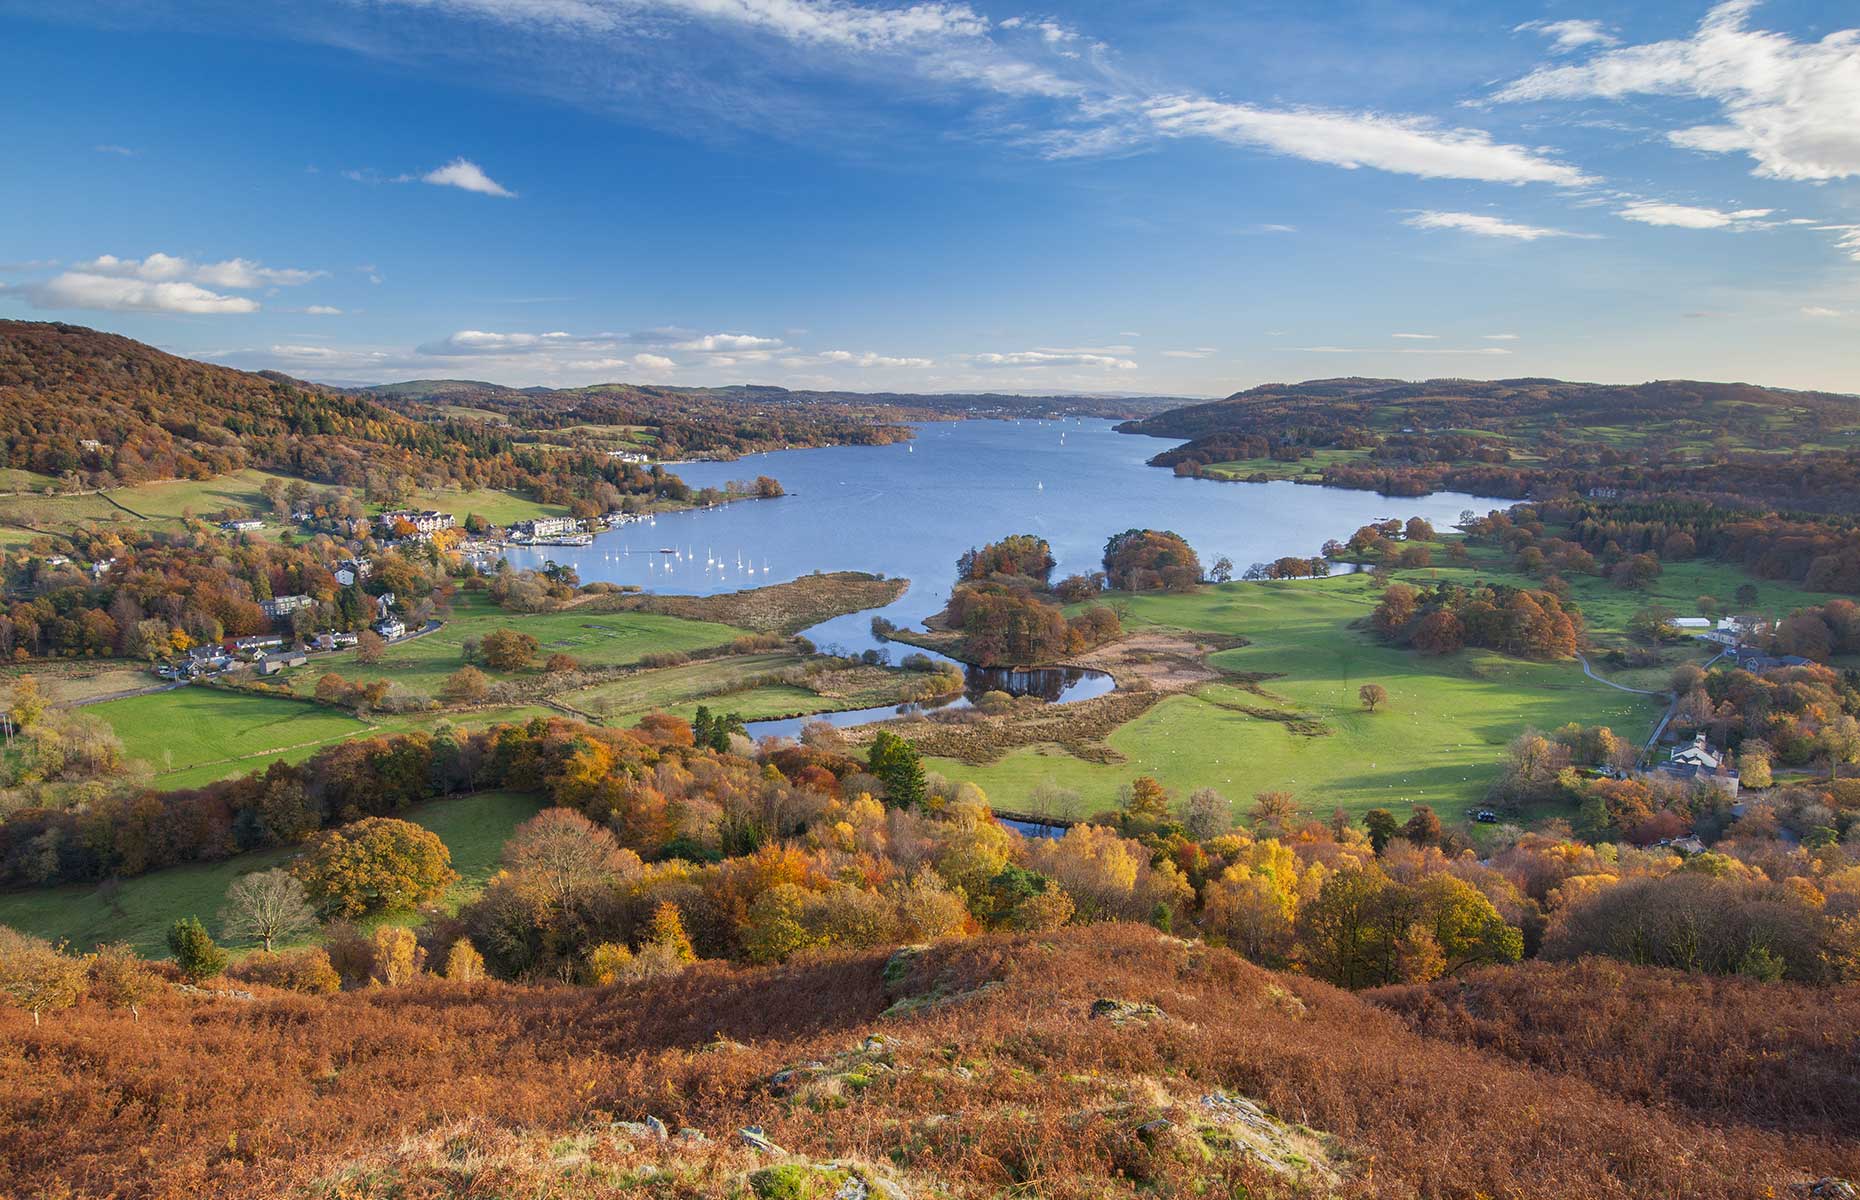 Lake Windermere in the Lake District Cumbria England (Image: James_Lindsay/Shutterstock)